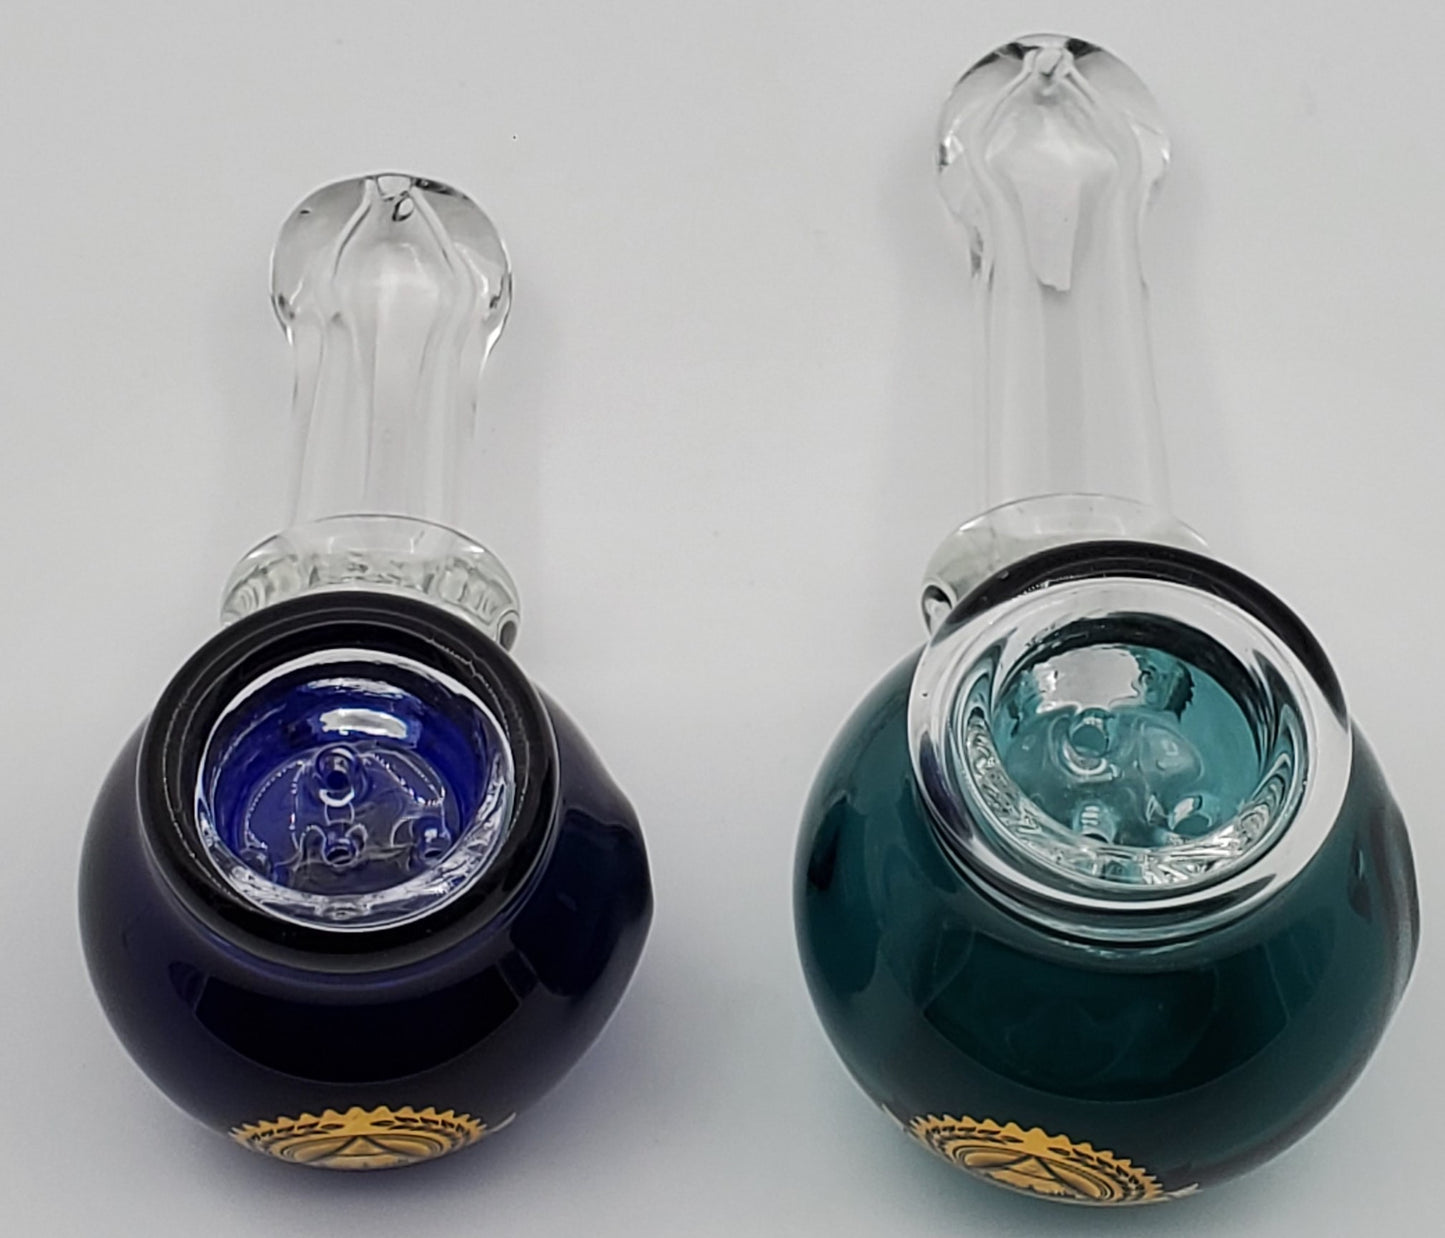 Illuminati Handpipe with Built-in Glass Screen - Assorted Sizes & Colors